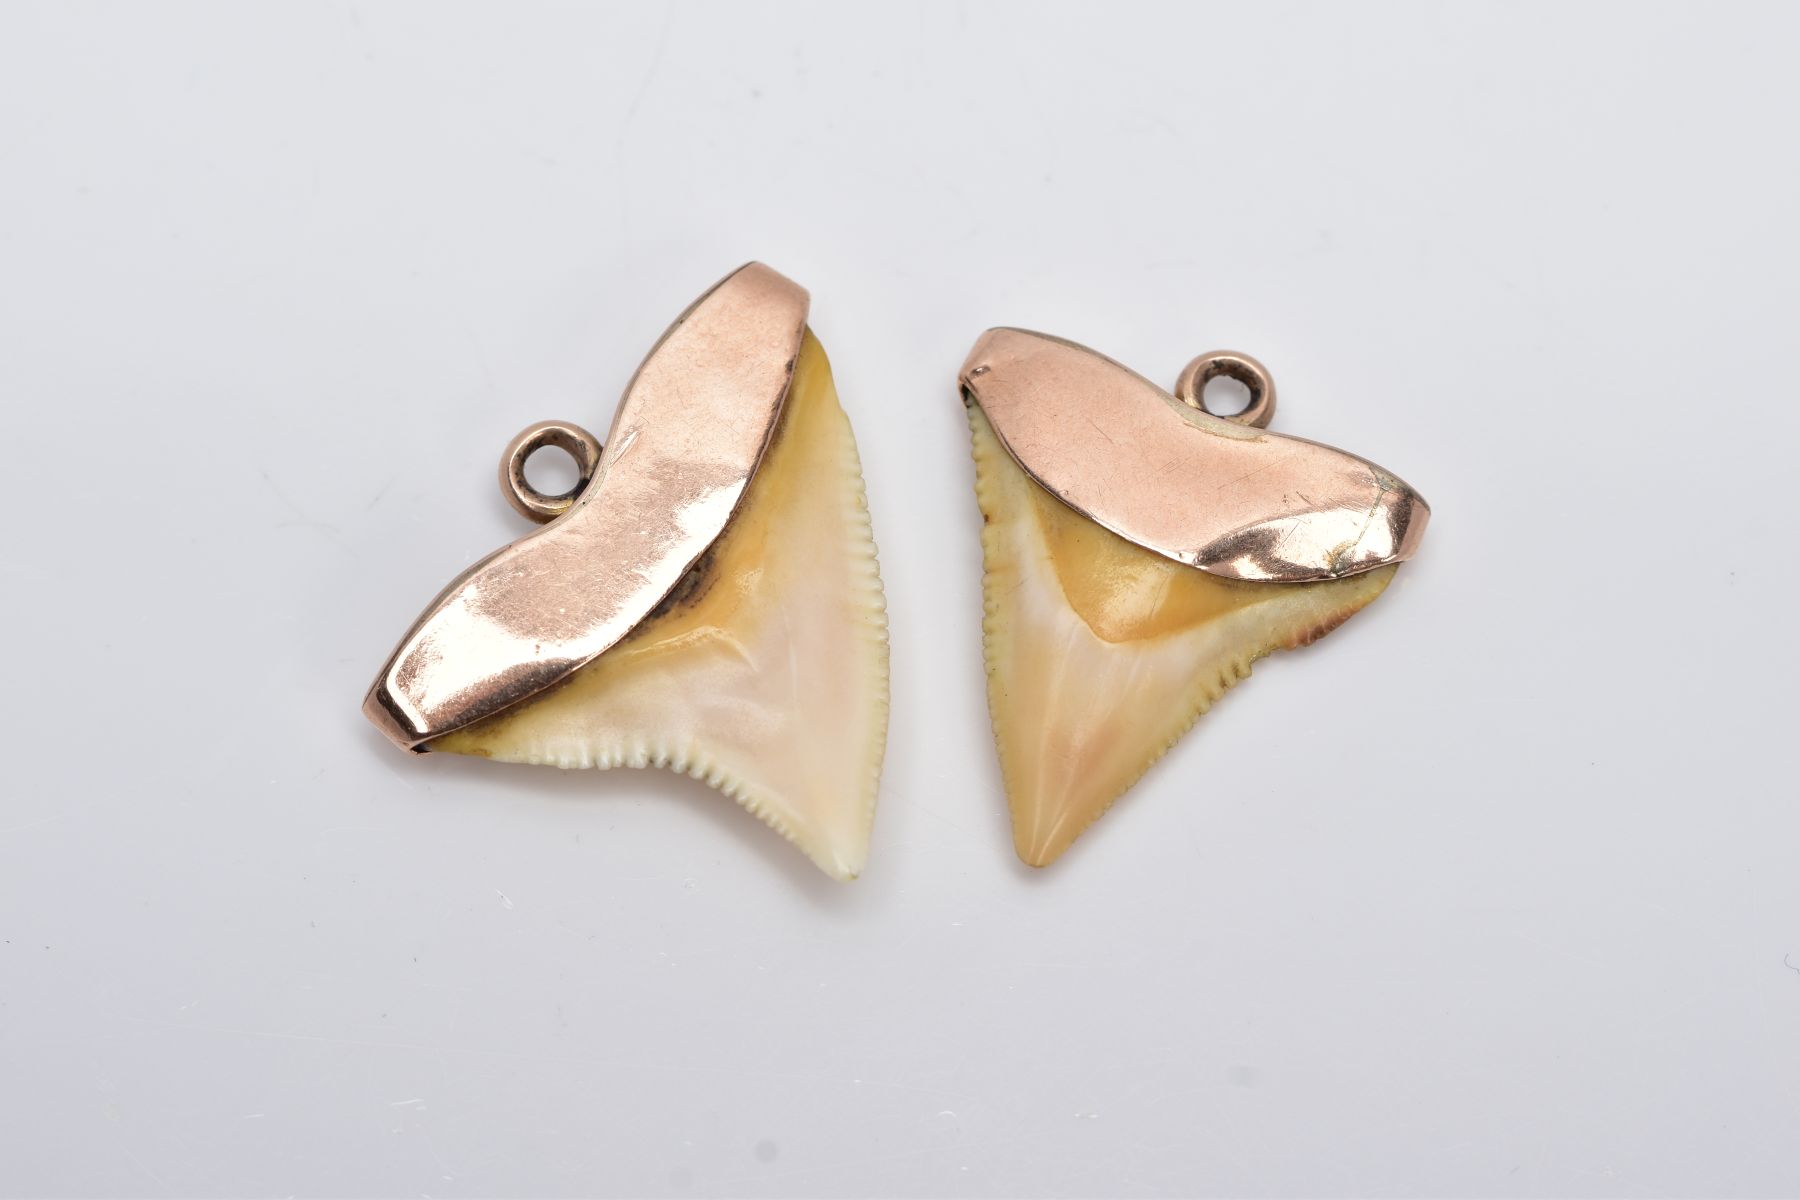 TWO YELLOW METAL MOUNTED SHARK TEETH, each mounted with a suspension ring, no hallmarks or stamps,